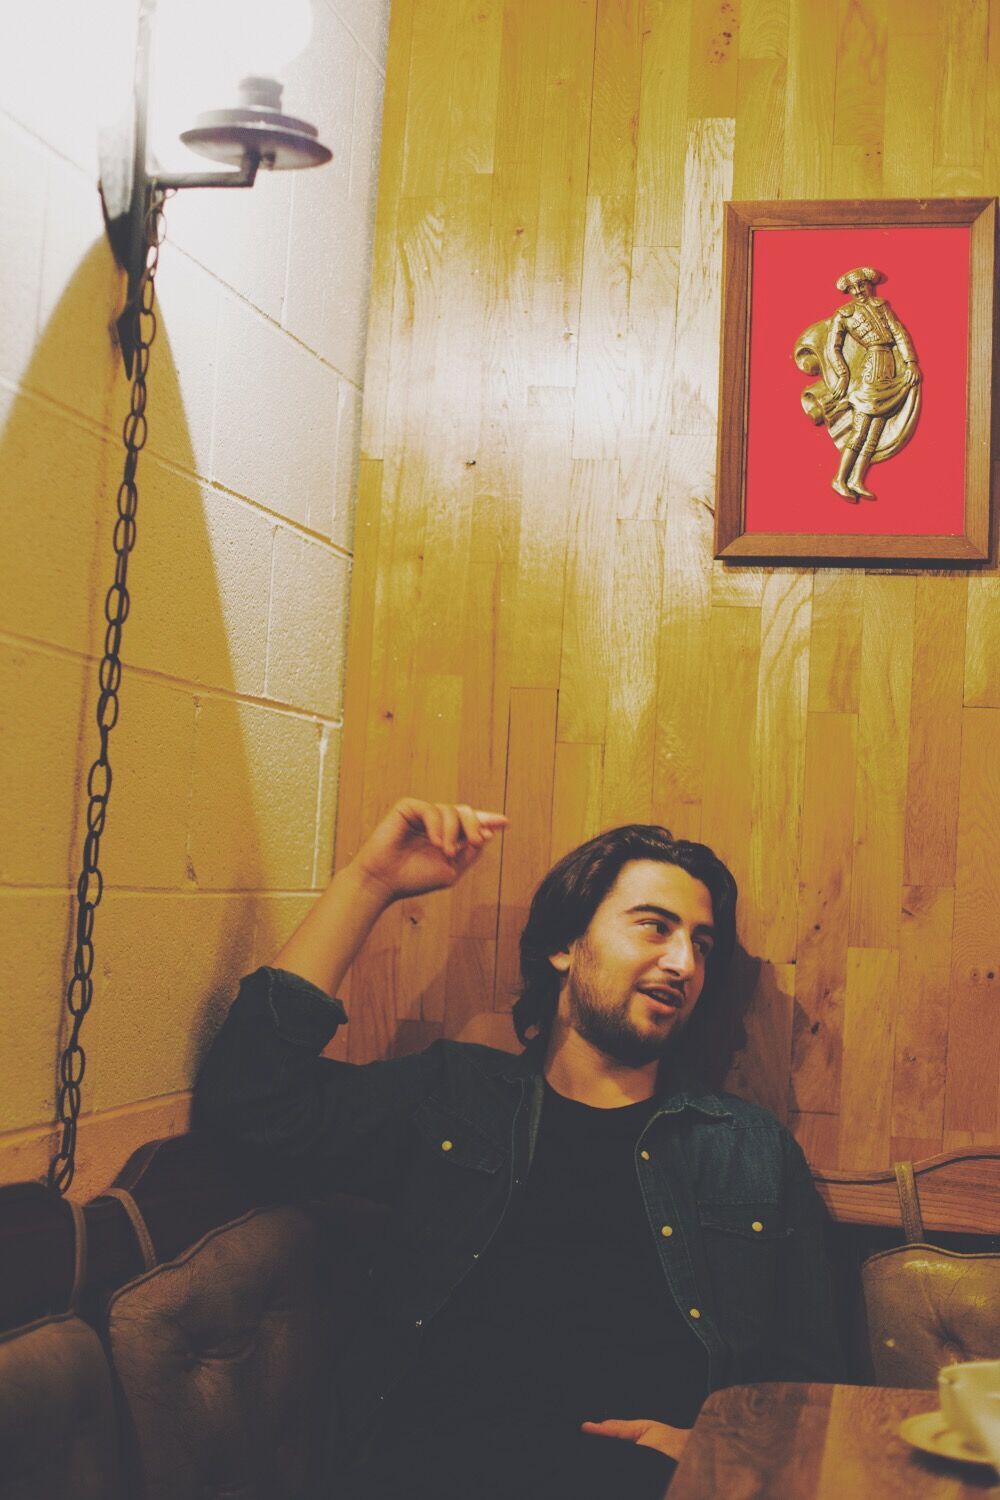 Lord Huron – “The World Ender” (Stereogum Premiere)